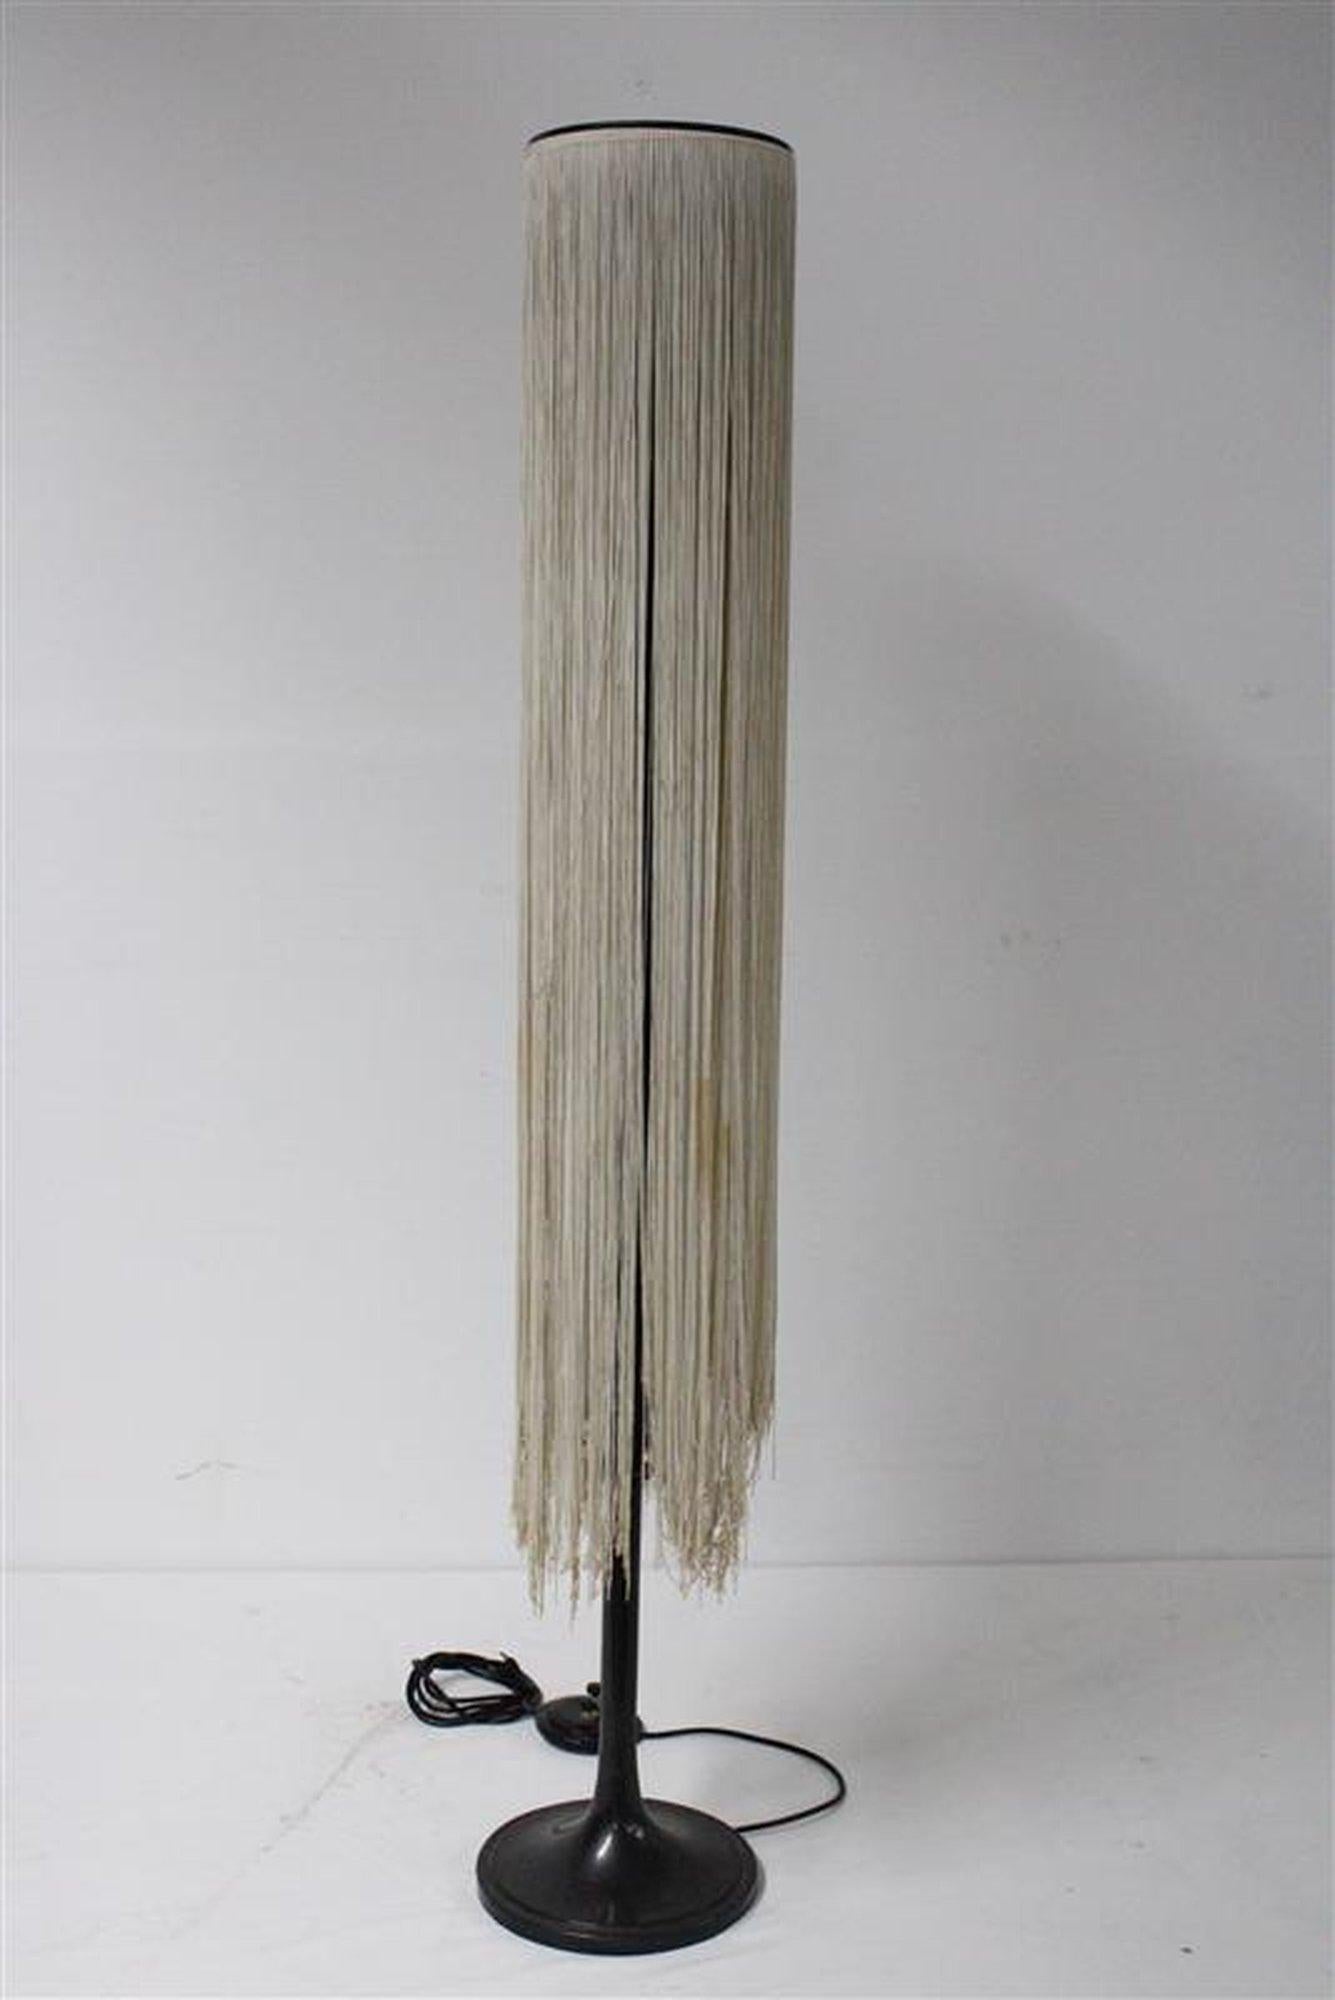 Gino Sarfatti Floor Lamp Mod 1091 In Fair Condition For Sale In Red Lion, PA